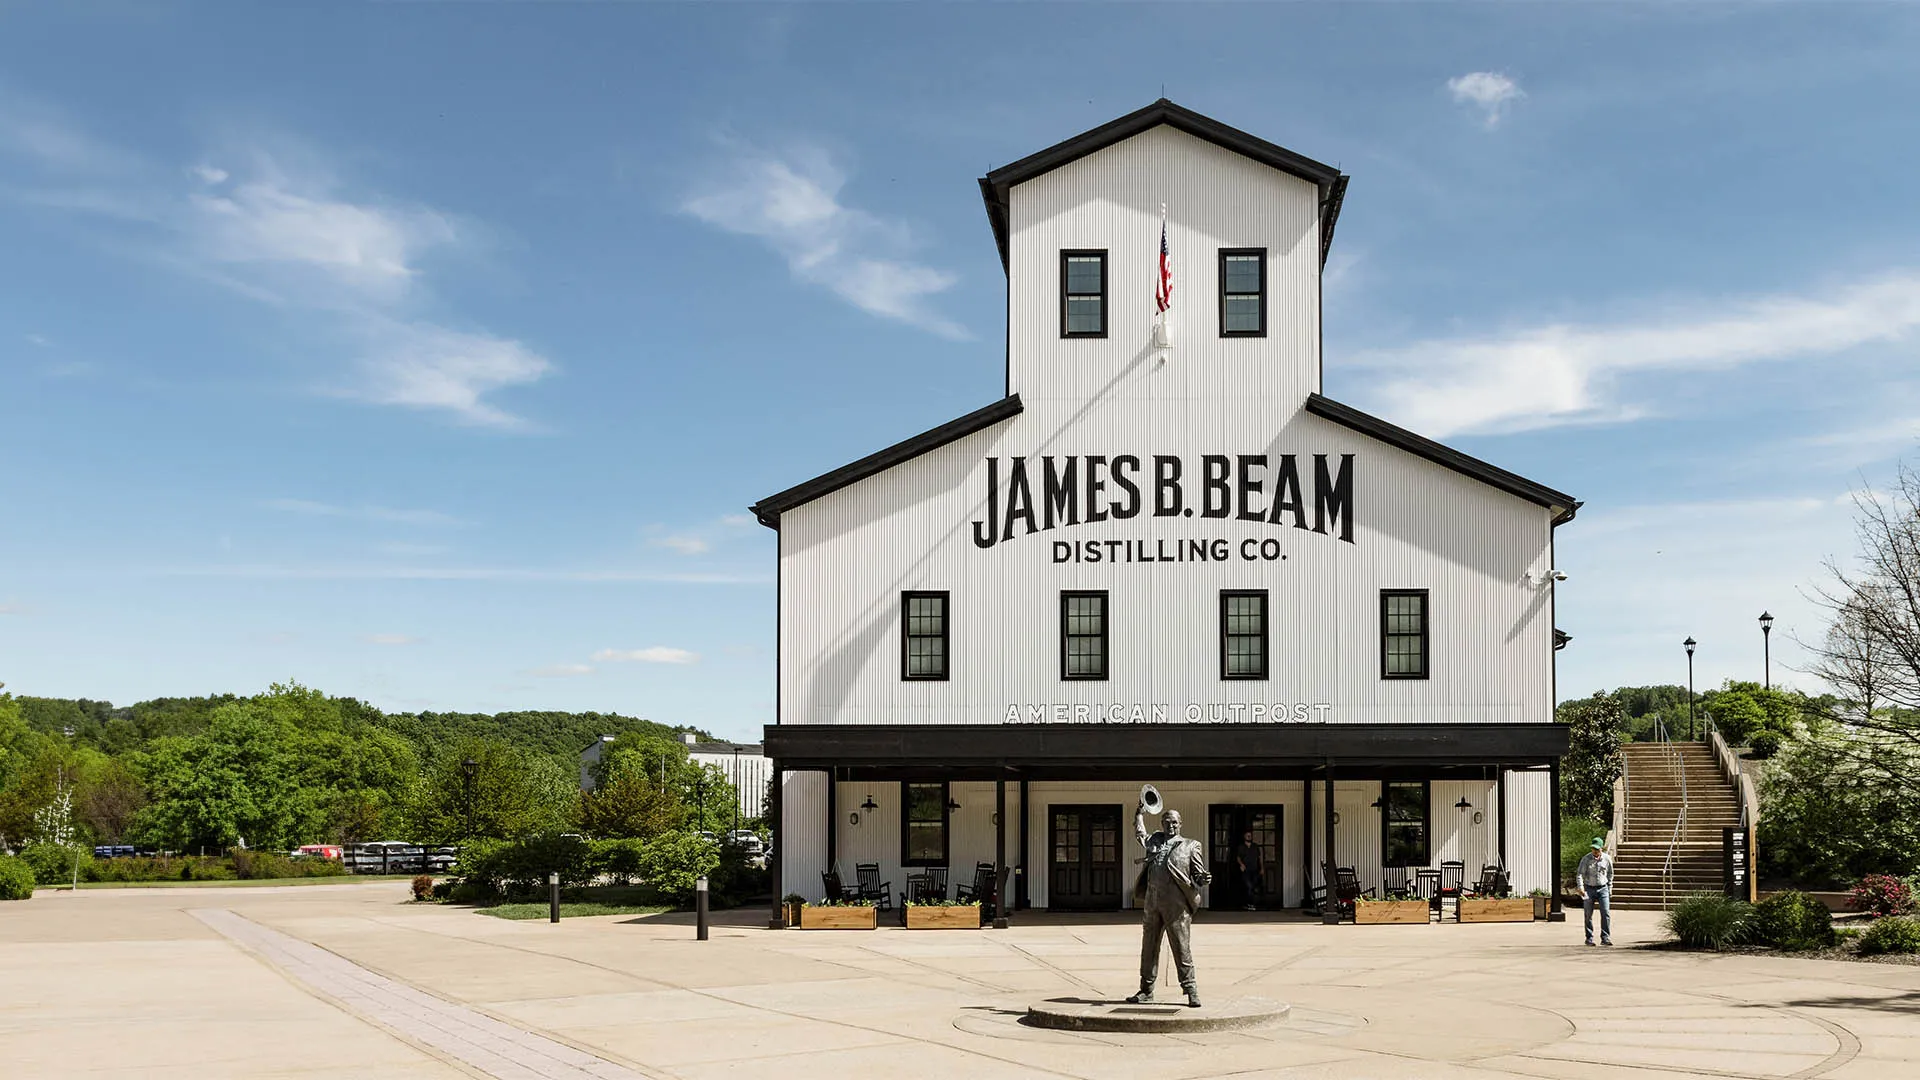 James B. Beam Distilling Co. Announces New Visitor Experiences and Events Calendar